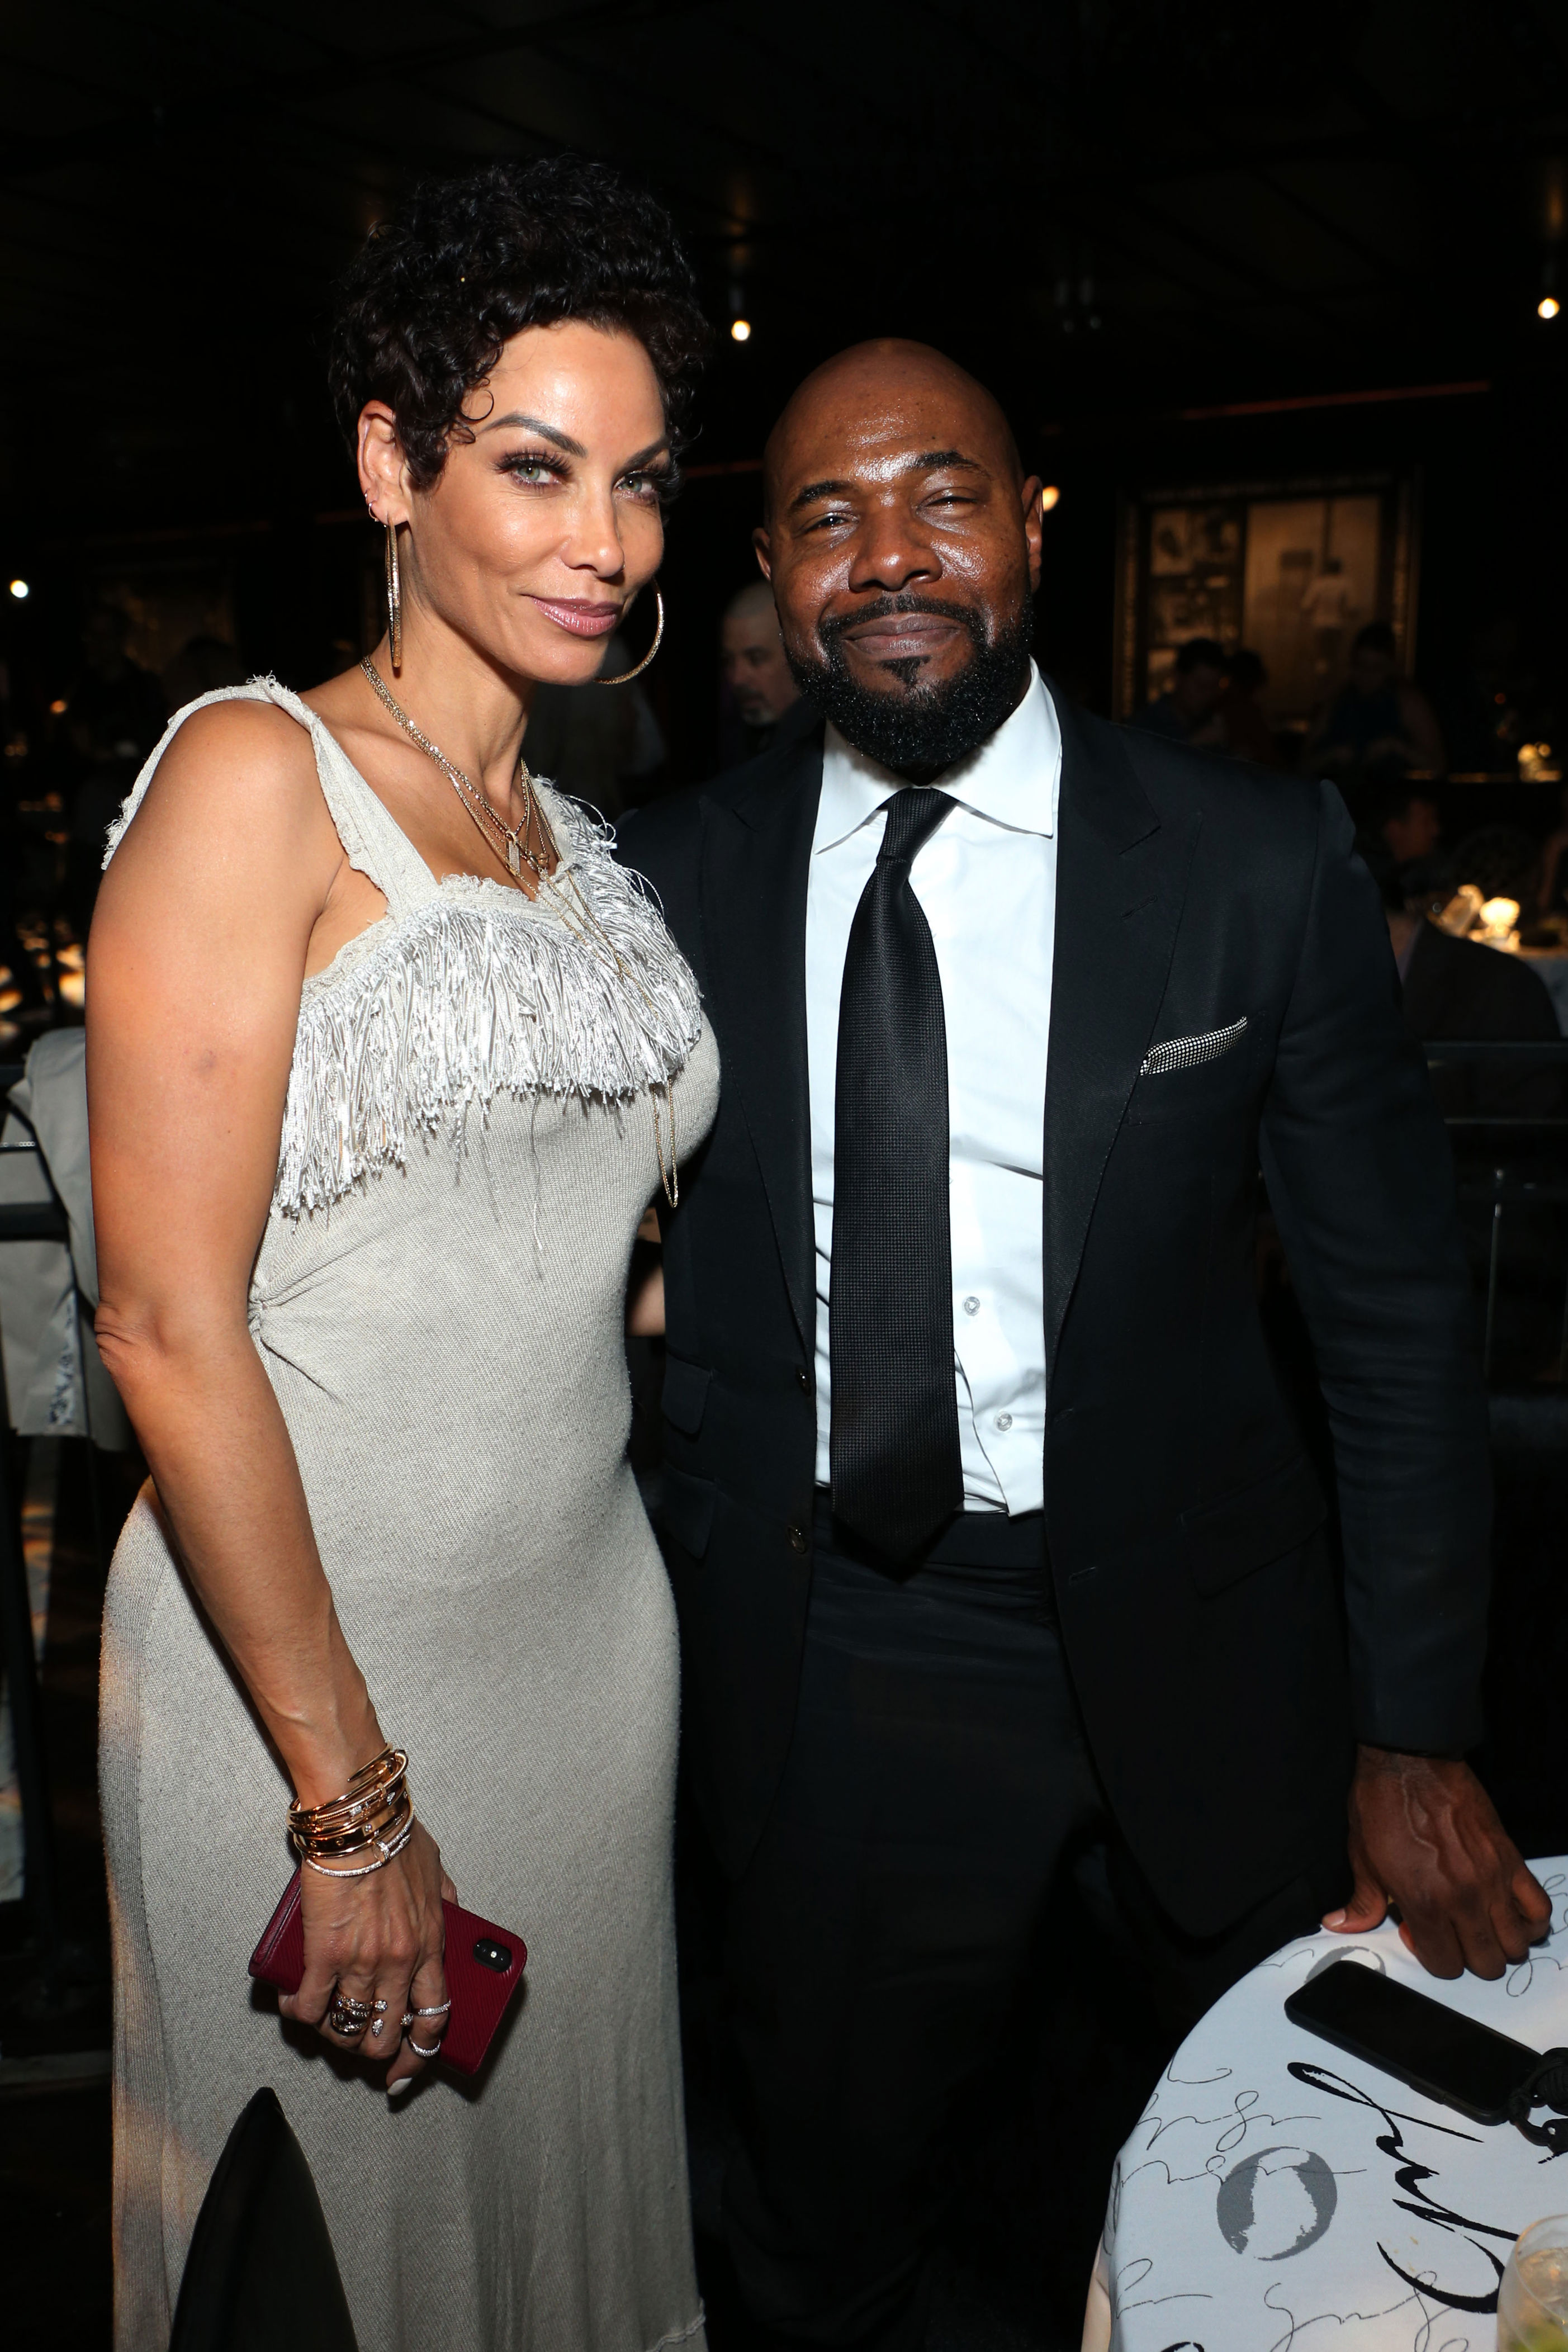 <p>Nicole Murphy made <a href="https://www.wonderwall.com/celebrity/couples/britney-spears-boyfriend-sam-asghari-engaged-rumors-red-carpet-debut-celeb-love-life-news-late-july-2019-hollywood-romance-report-3020478.gallery?photoId=1059414">headlines</a> in July 2019 when she was caught on camera kissing Antoine Fuqua -- who's been married to actress Lela Rochon for two decades -- at a hotel pool in Italy. On a September 2019 episode of "The Wendy Williams Show," Eddie Murphy's former wife said she regretted smooching the married "Training Day" director. She also apologized to his wife and family. She then claimed that <a href="https://www.wonderwall.com/celebrity/photos/miley-cyrus-girlfriend-kaitlynn-carter-breakup-celeb-love-life-news-late-september-2019-hollywood-romance-report-3021199.gallery?photoId=1059414">she was under the impression his marriage was over</a> when they kissed and encouraged other women to "do your research" so they don't accidentally end up becoming the other woman.</p>